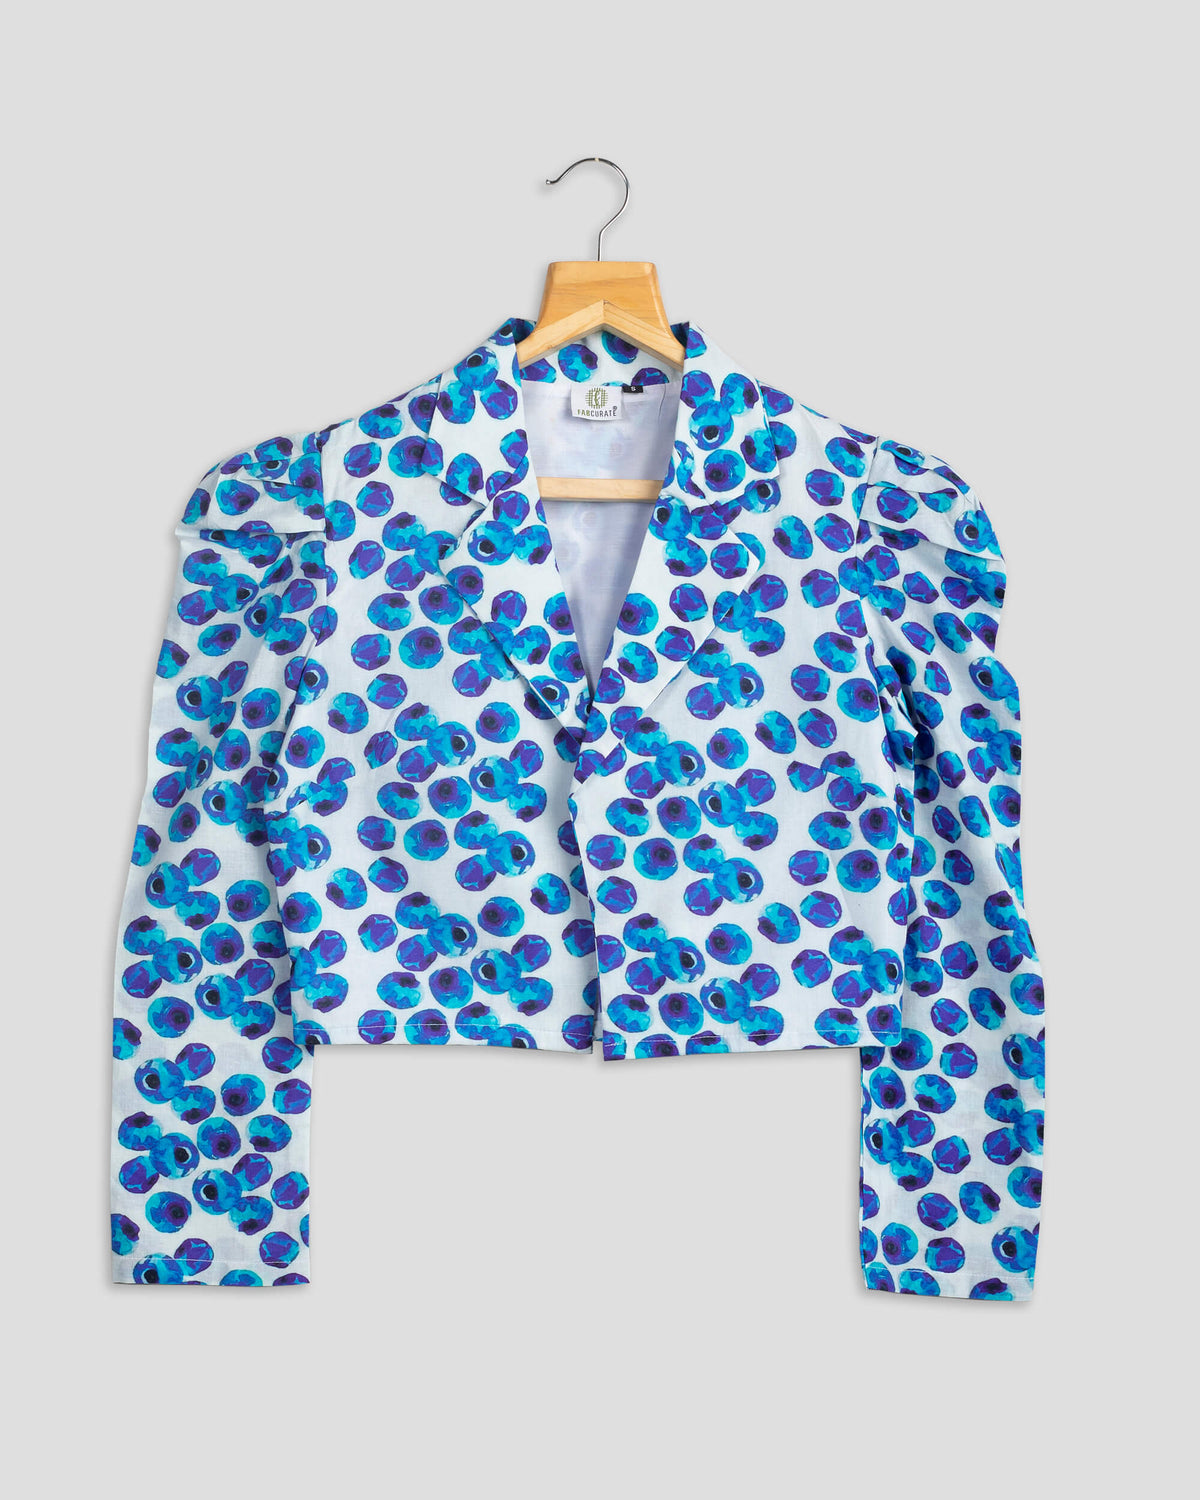 Attractive Floral Jacket For Women